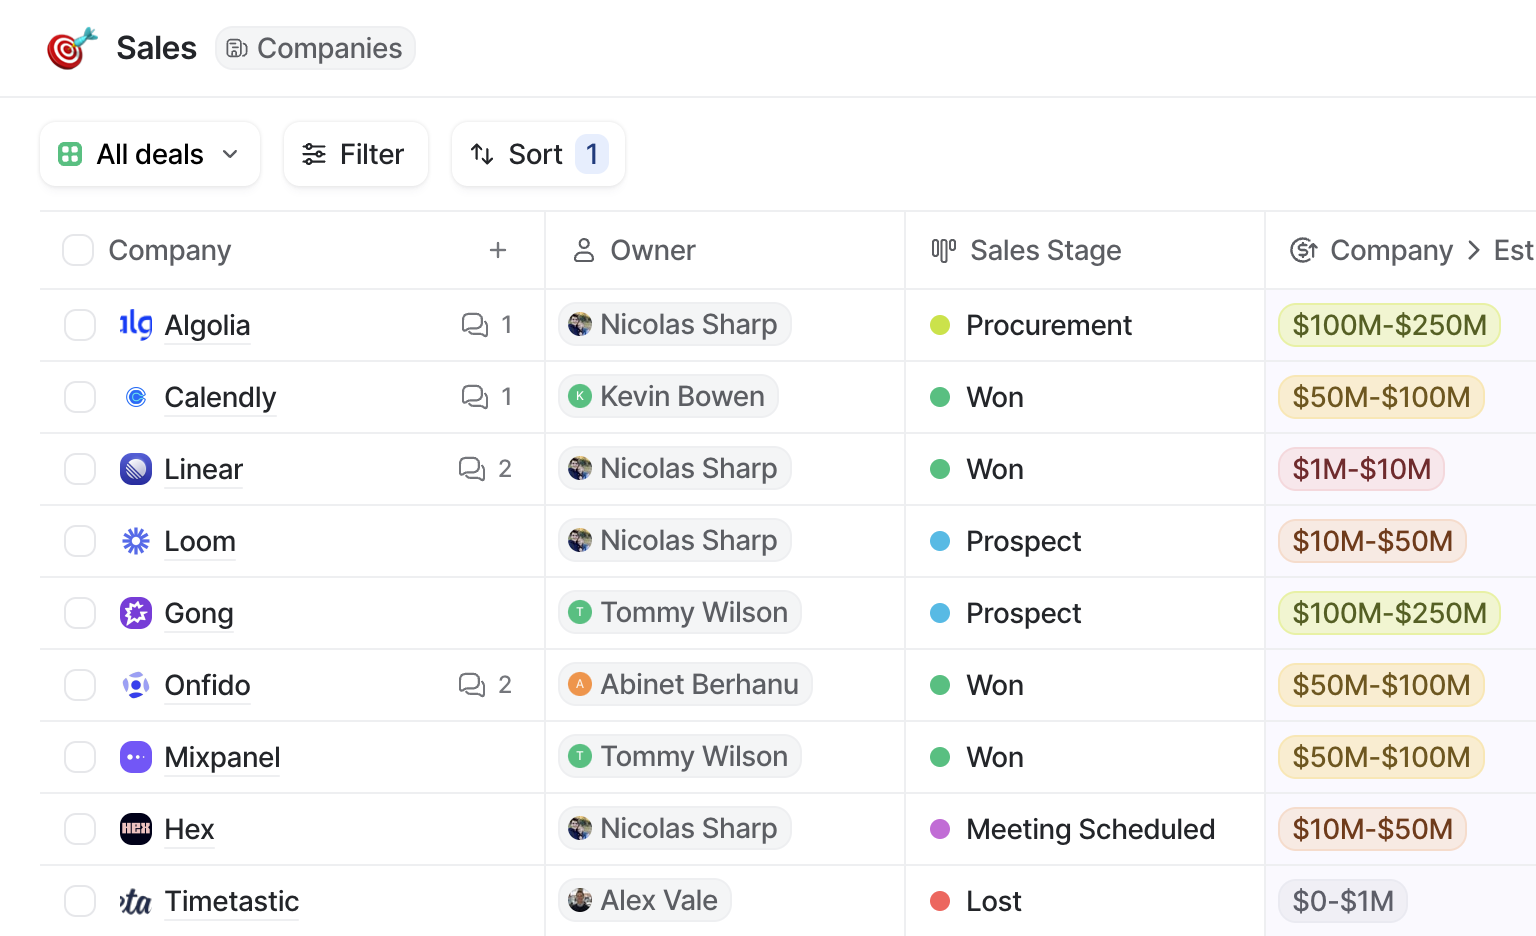 Table view of a list of companies involved in a Sales process showing columns with Owner and Sales stage